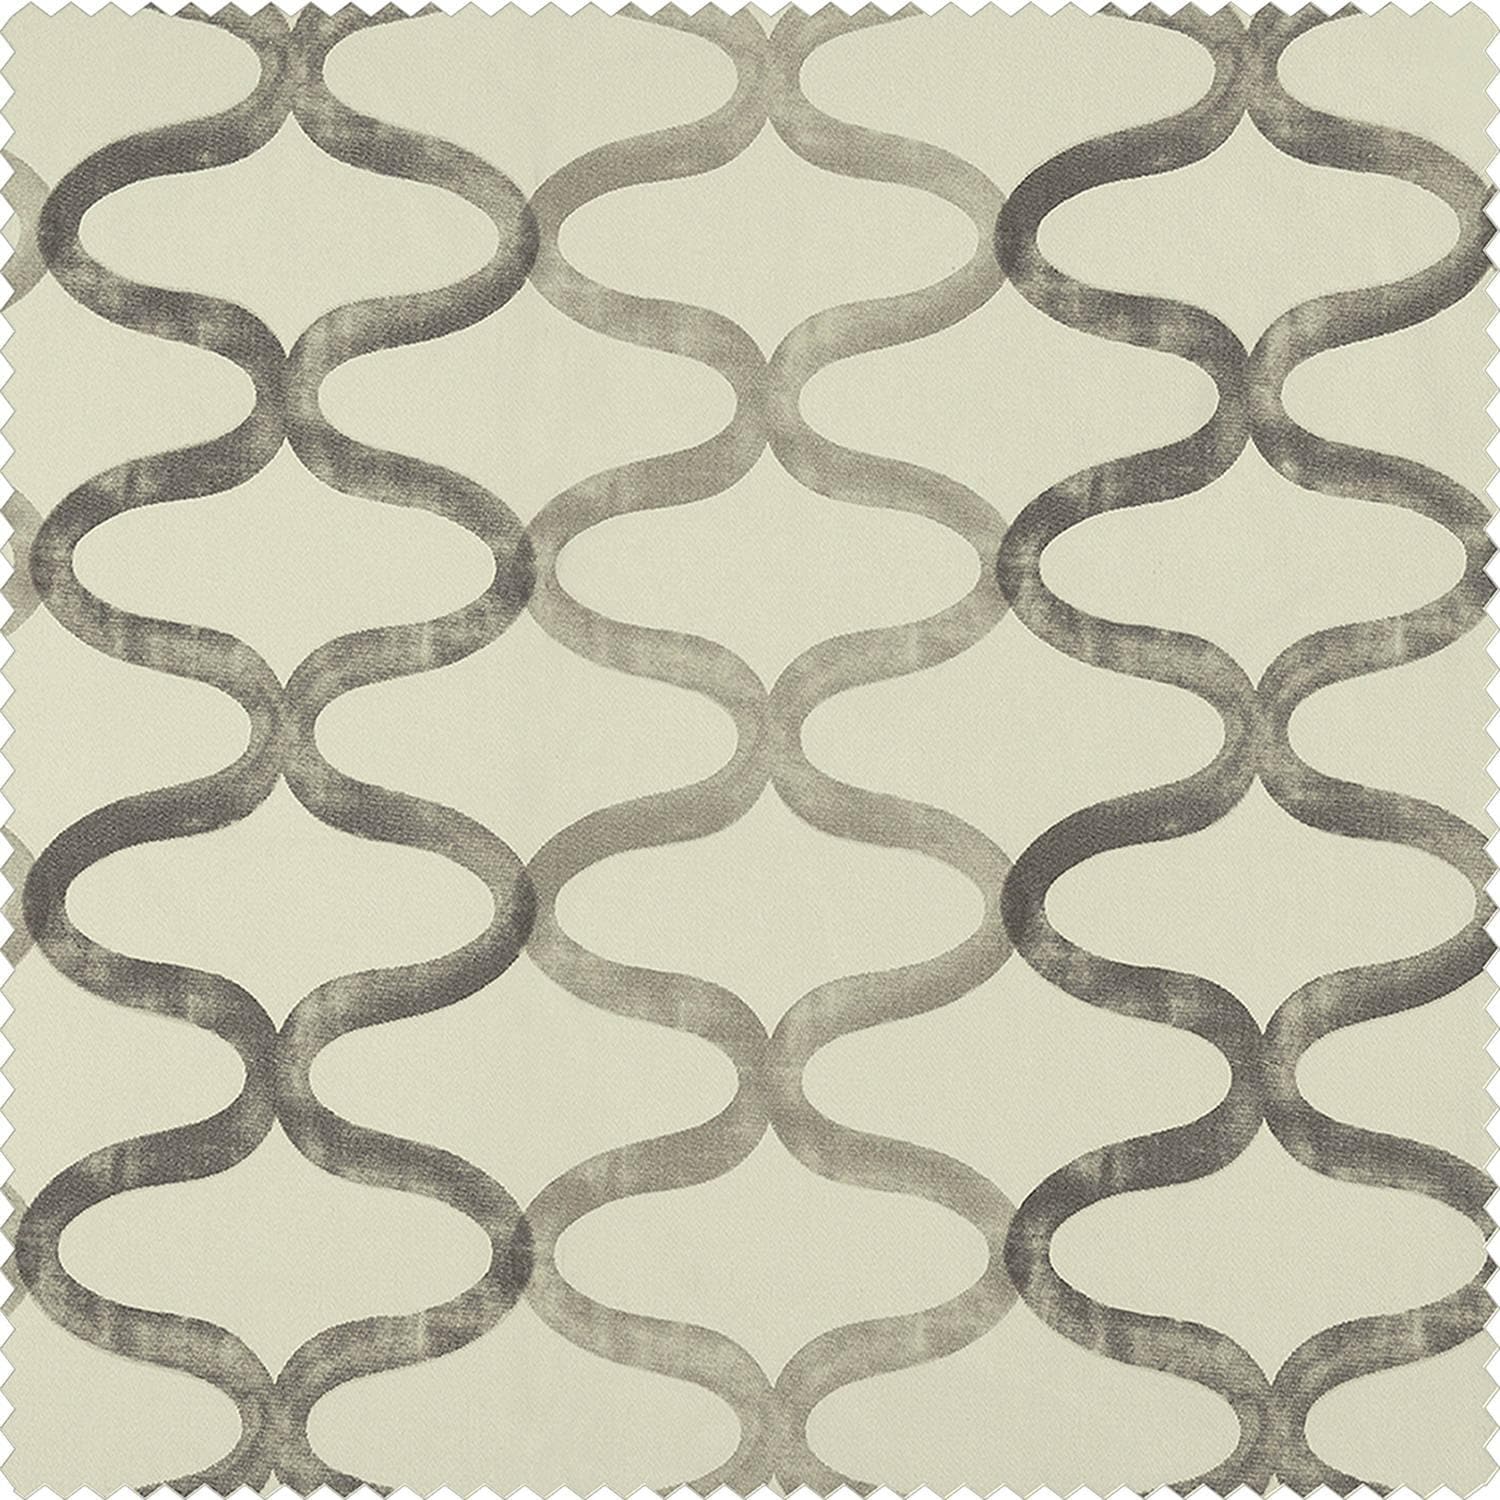 Illusions Silver Grey Printed Cotton Table Runner & Placemats